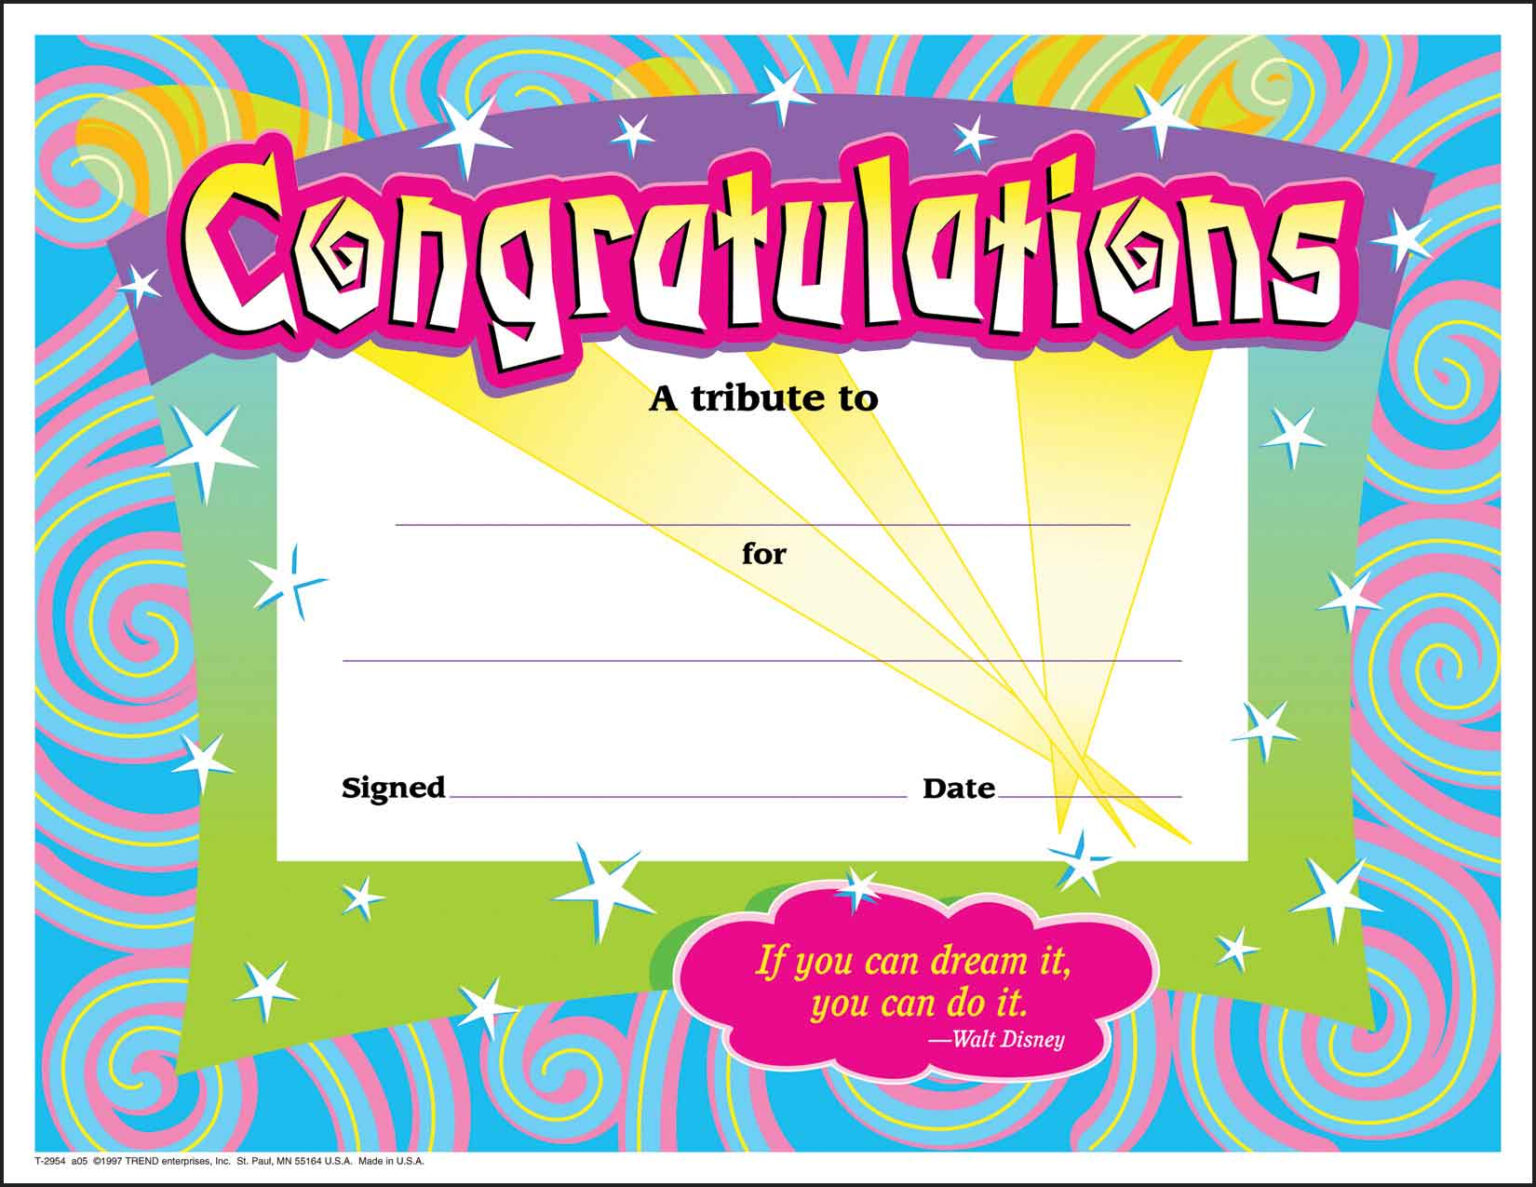 30 Congratulations Awards (Large) Swirl Certificate Pack Pertaining To